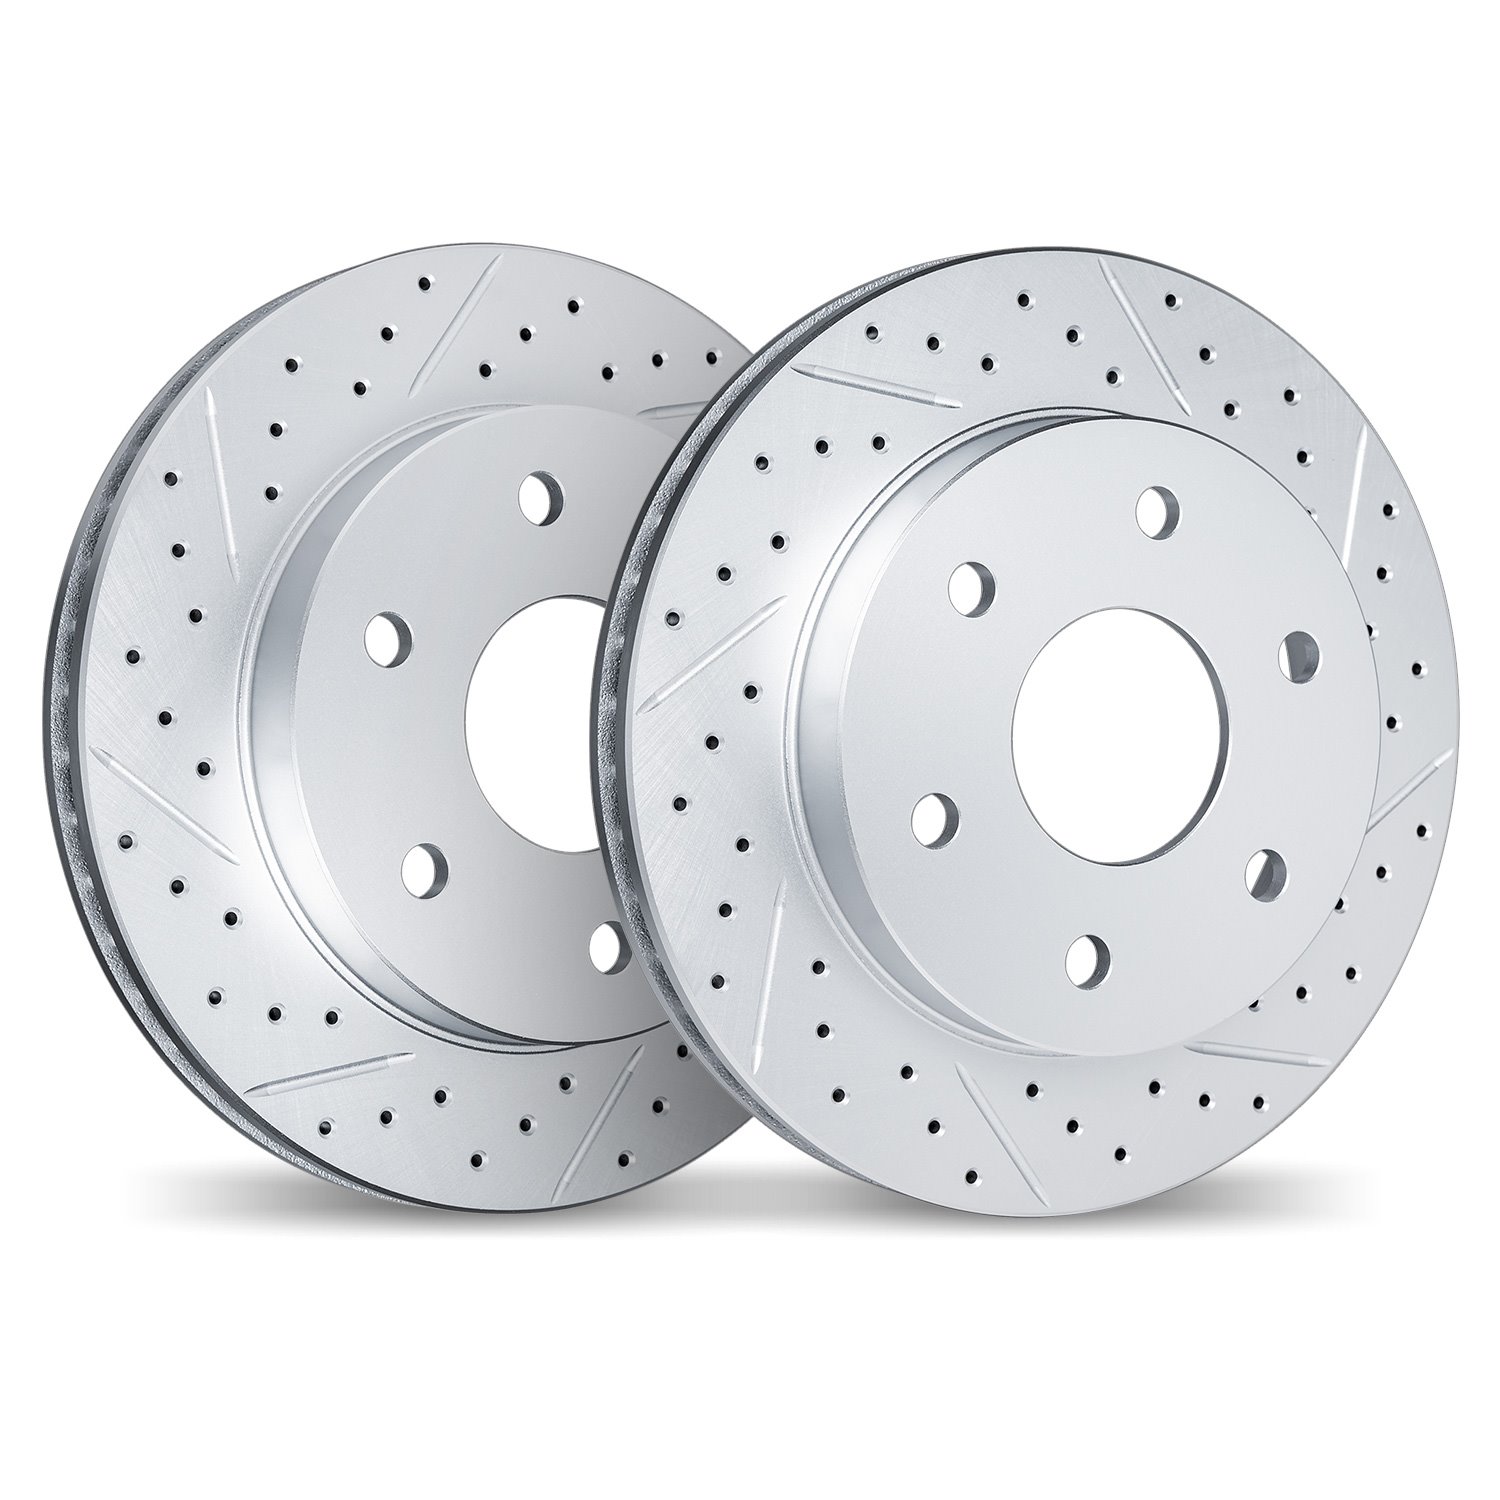 2002-48001 Geoperformance Drilled/Slotted Brake Rotors, Fits Select GM, Position: Front